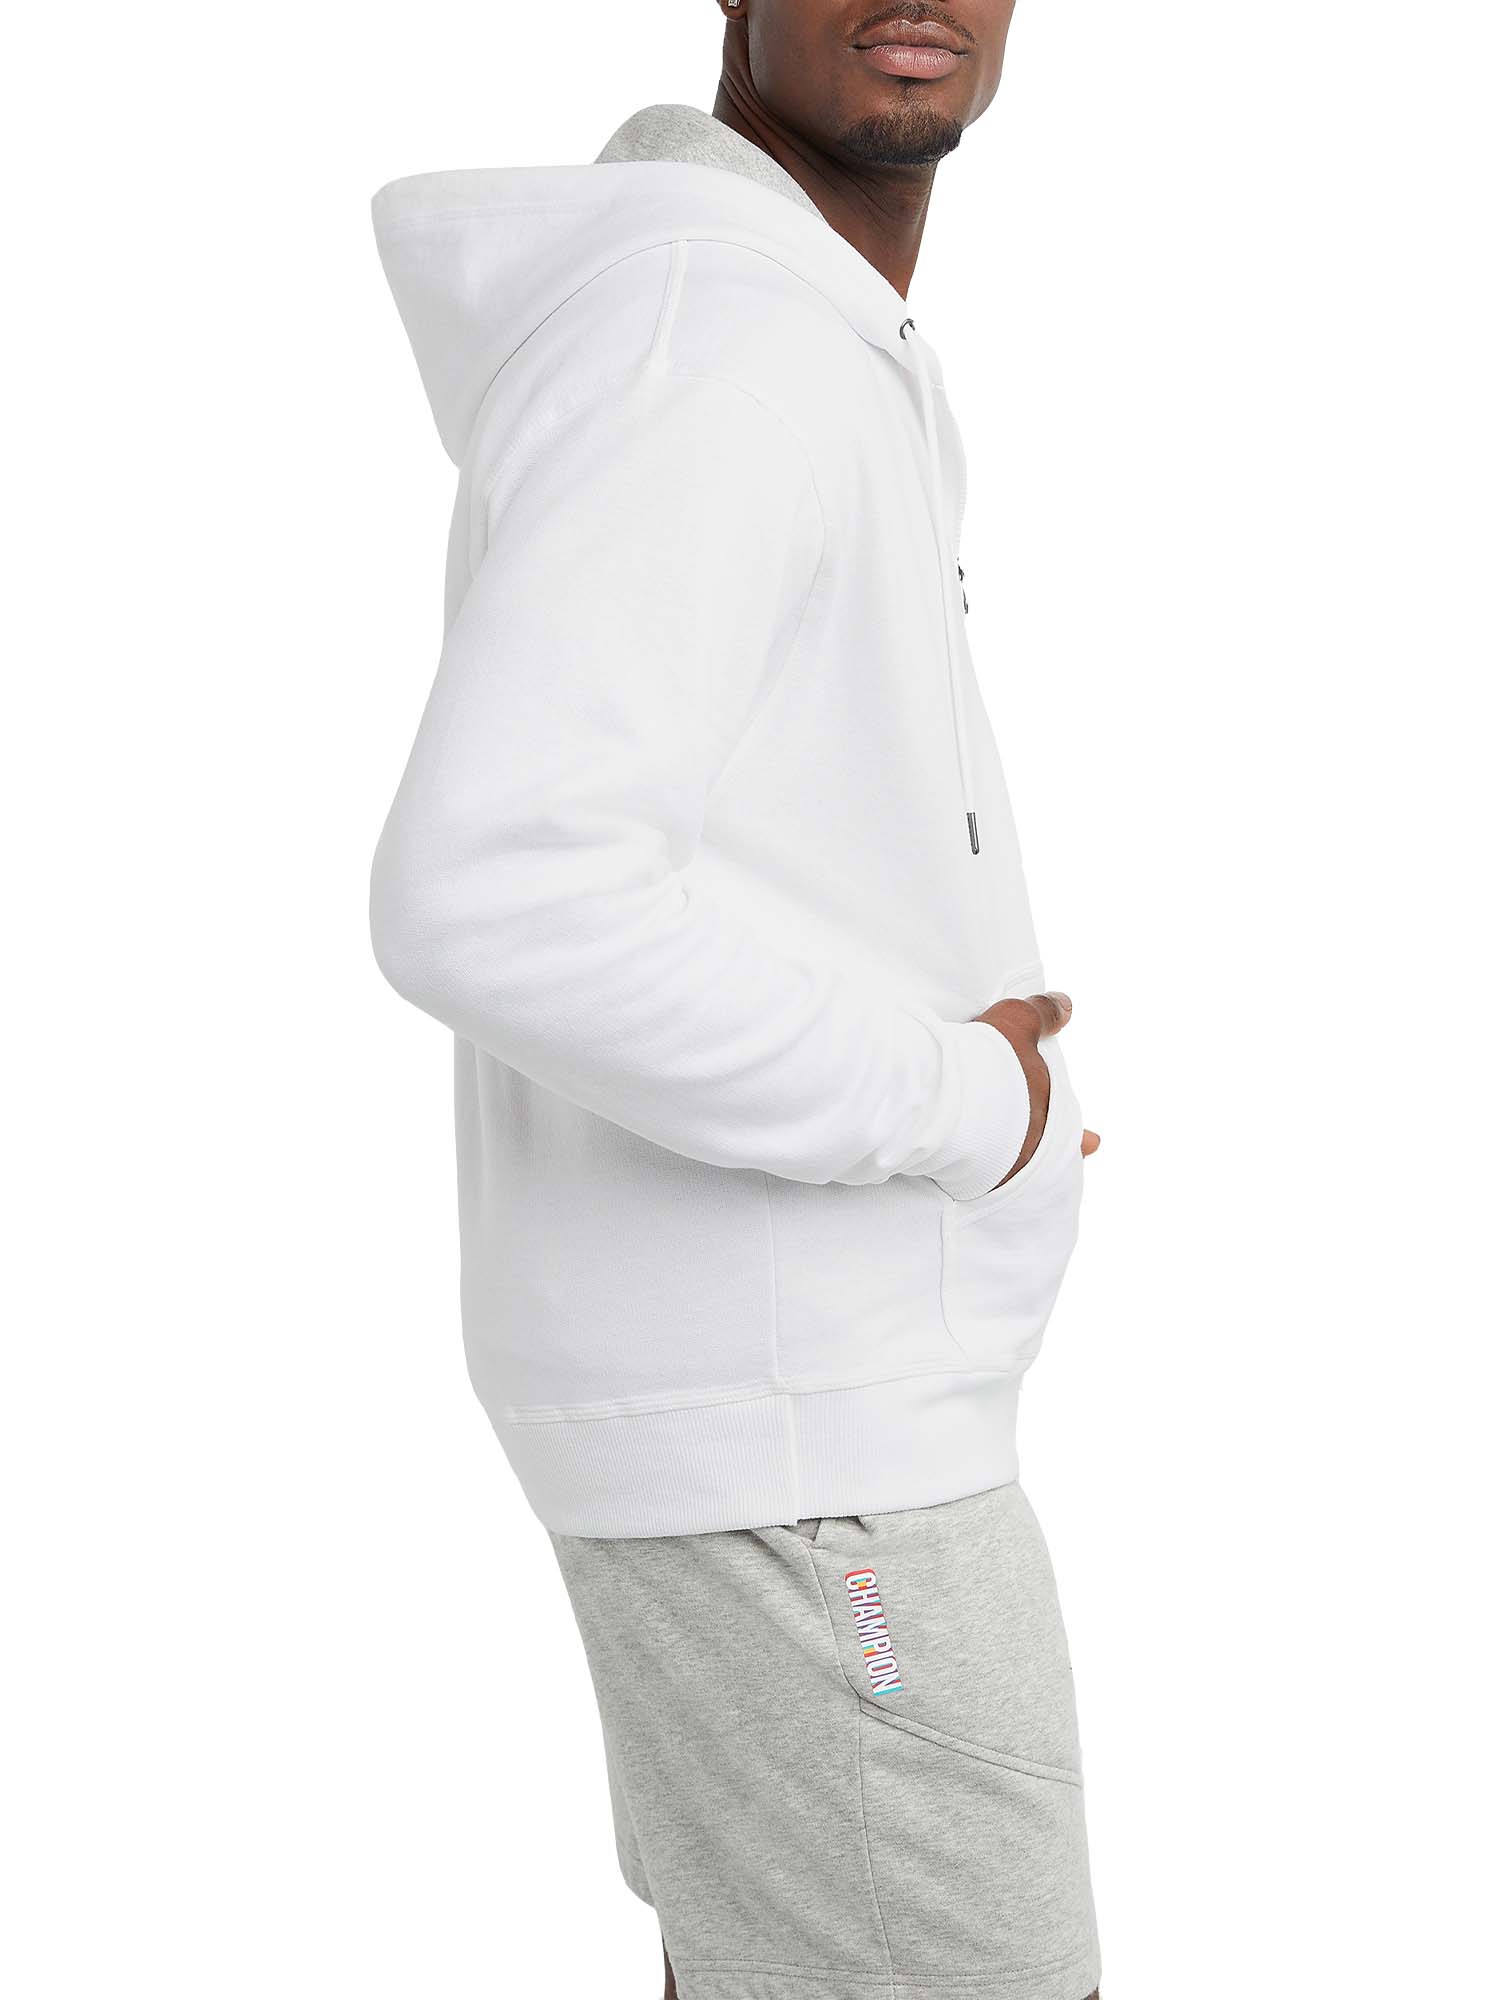 Champion Men's and Big Men's Powerblend Zip-Up Hoodie, Sizes up to 2XL - image 5 of 7